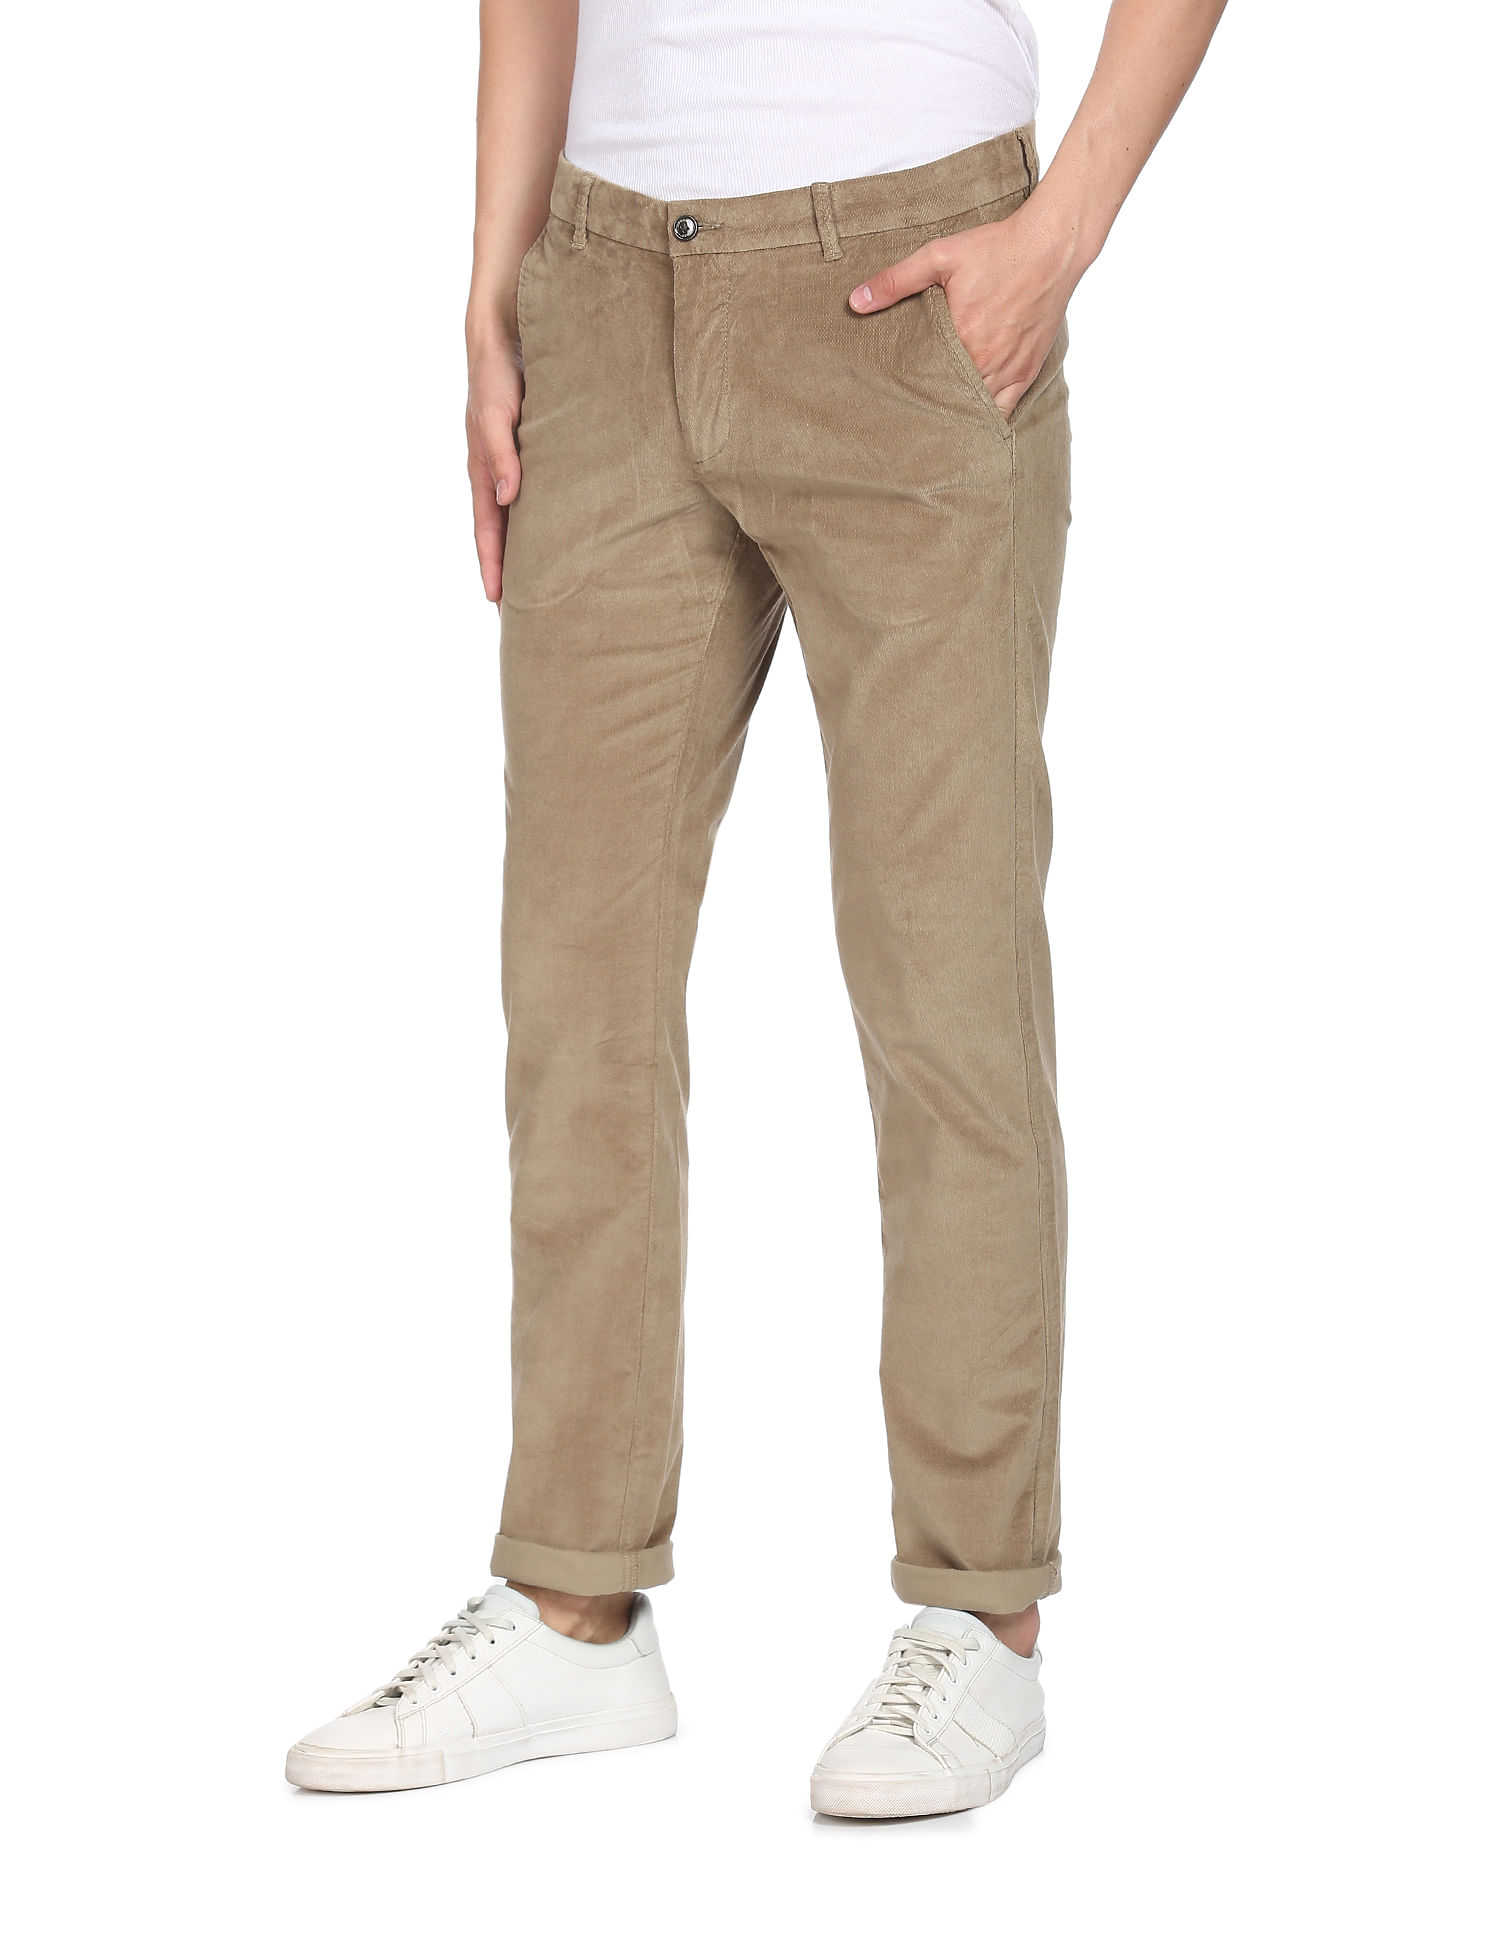 Men's Traditional Fit No Iron Chino Pants | Lands' End